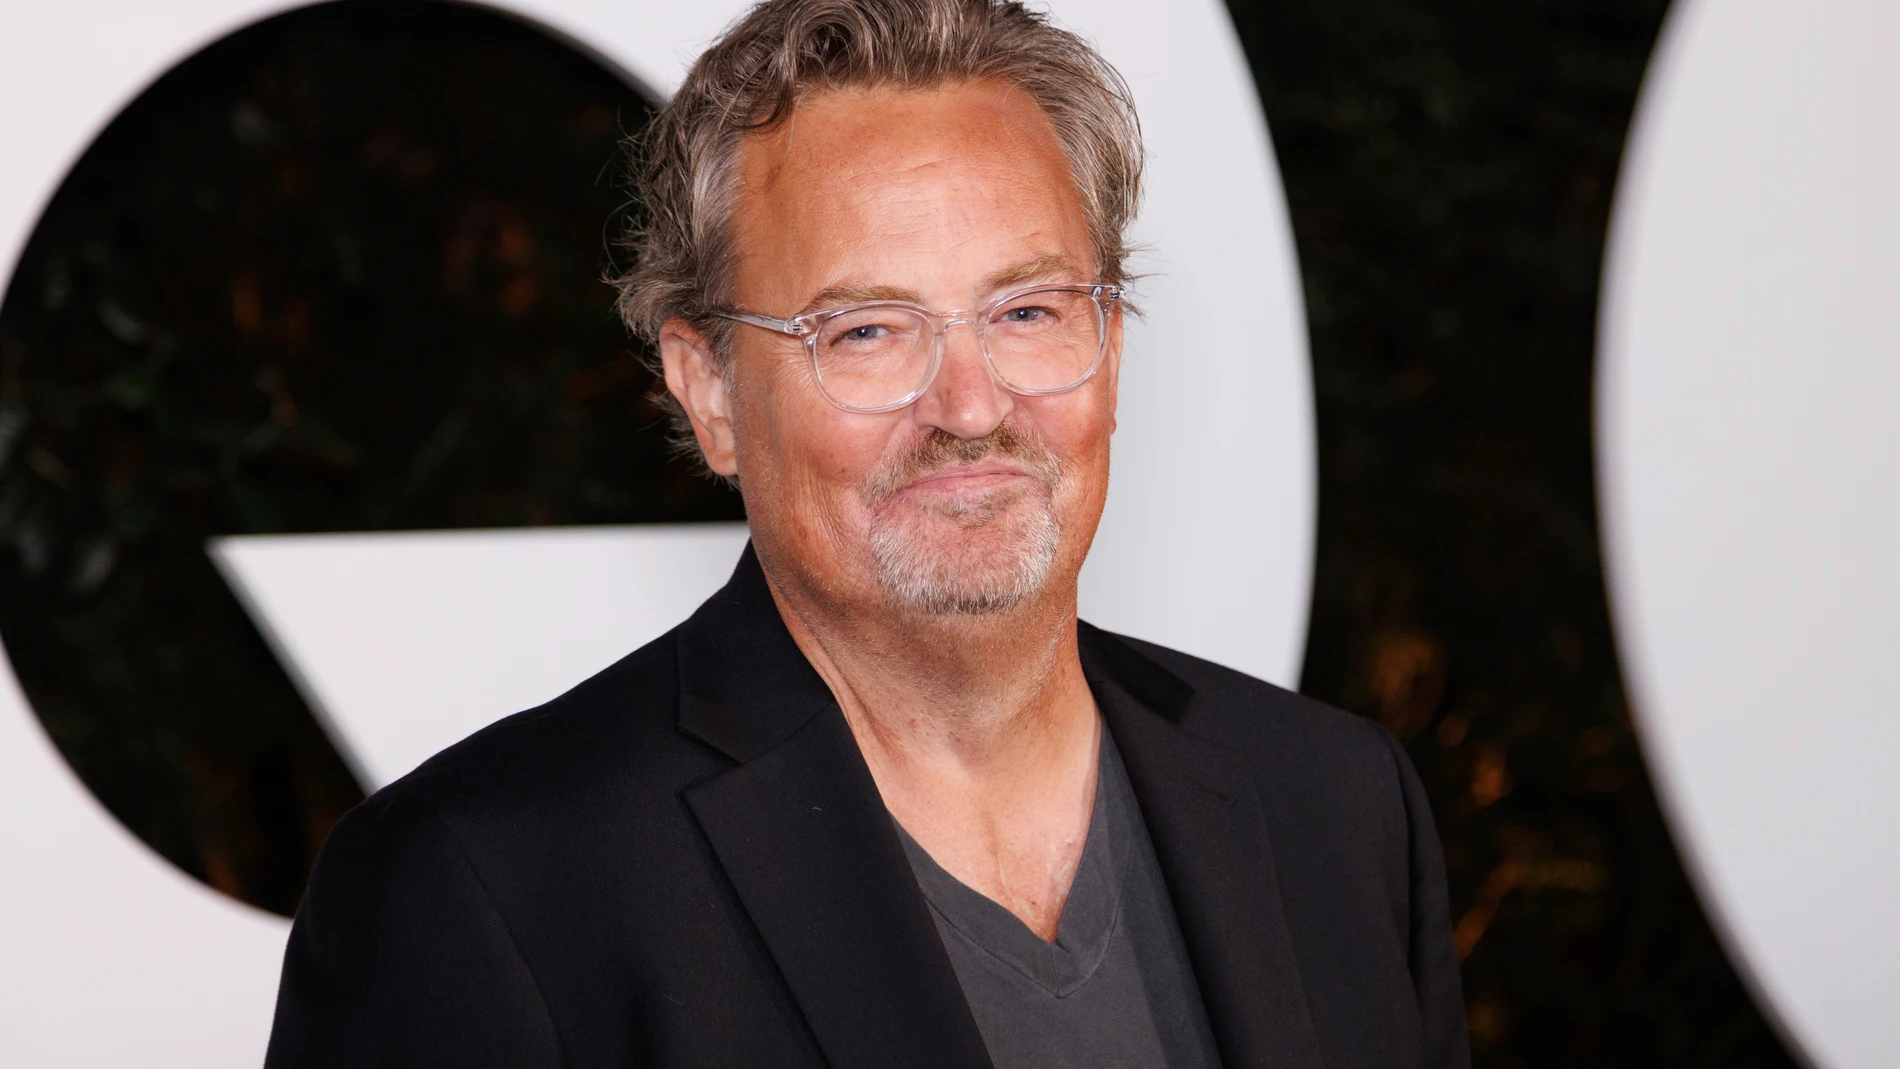 FILE - Matthew Perry arrives at the GQ Men of the Year Party on Thursday, Nov.17, 2022, in West Hollywood, Calif. Perry, who starred Chandler Bing in the hit series “Friends,” has died. He was 54. The Emmy-nominated actor was found dead of an apparent drowning at his Los Angeles home on Saturday, according to the Los Angeles Times and celebrity website TMZ, which was the first to report the news. Both outlets cited unnamed sources confirming Perry’s death. His publicists and other representat...